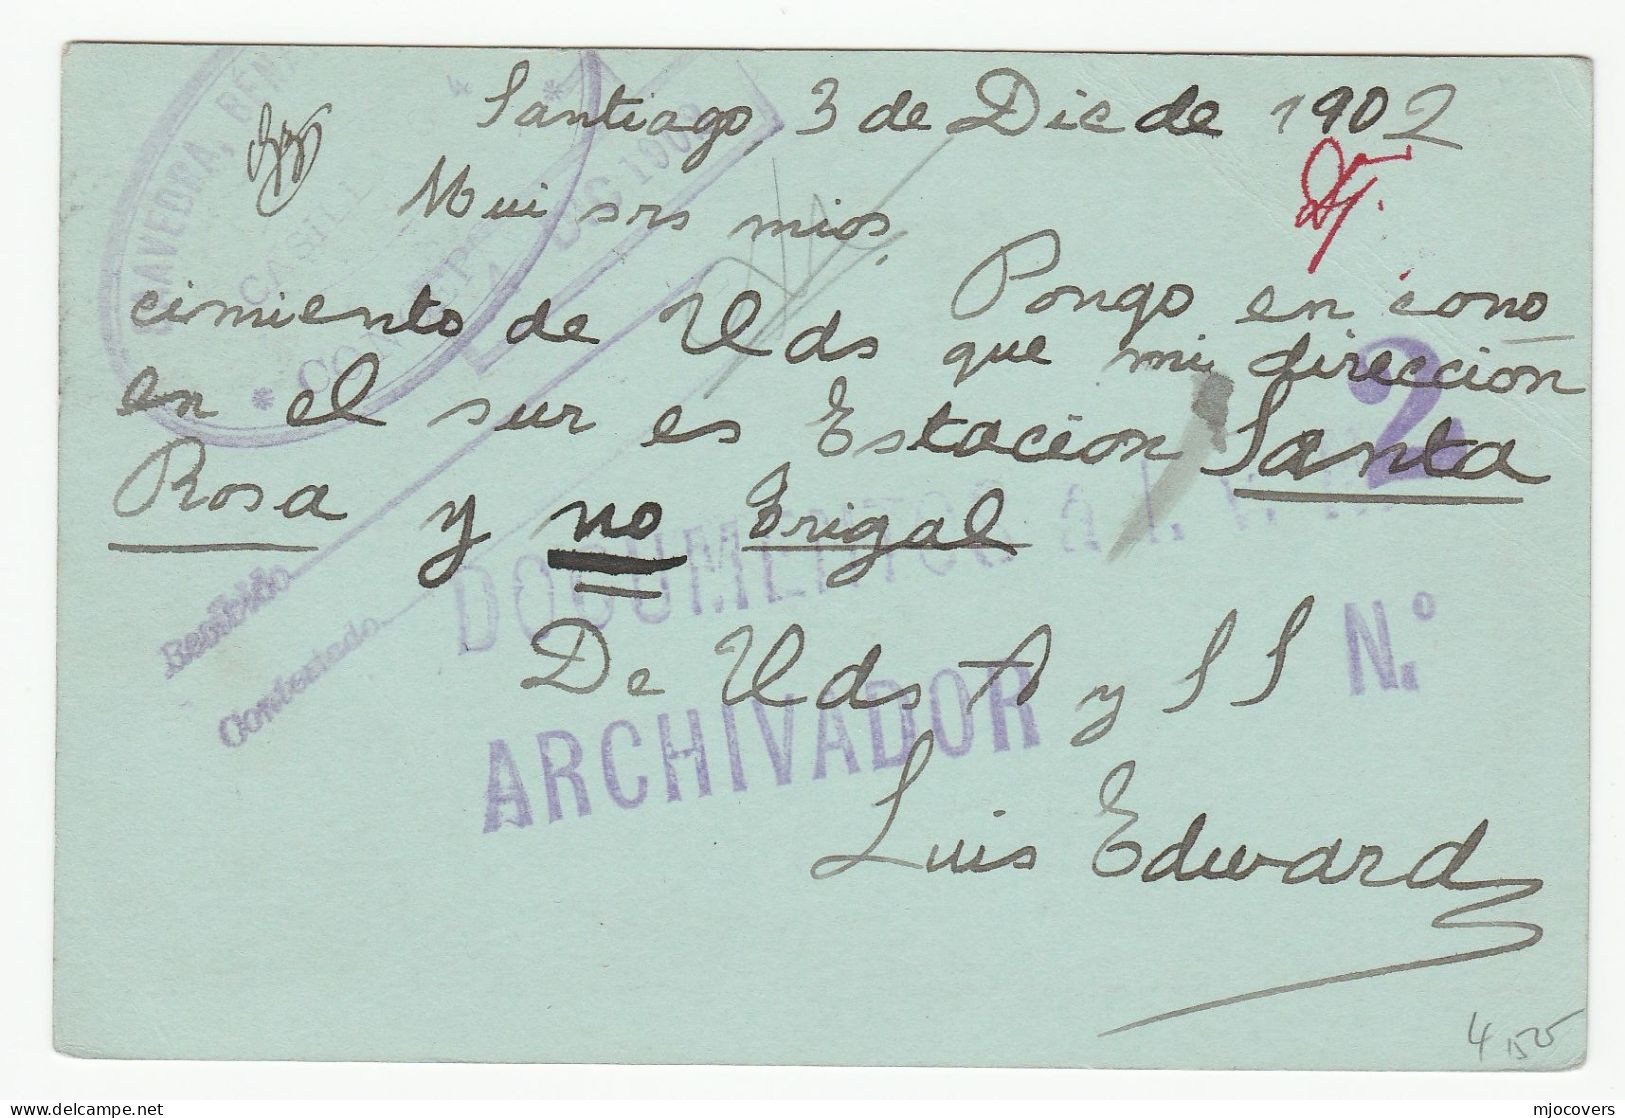 1902 CHILE Postal STATIONERY Card Santiago Conception Cover Stamps - Chili